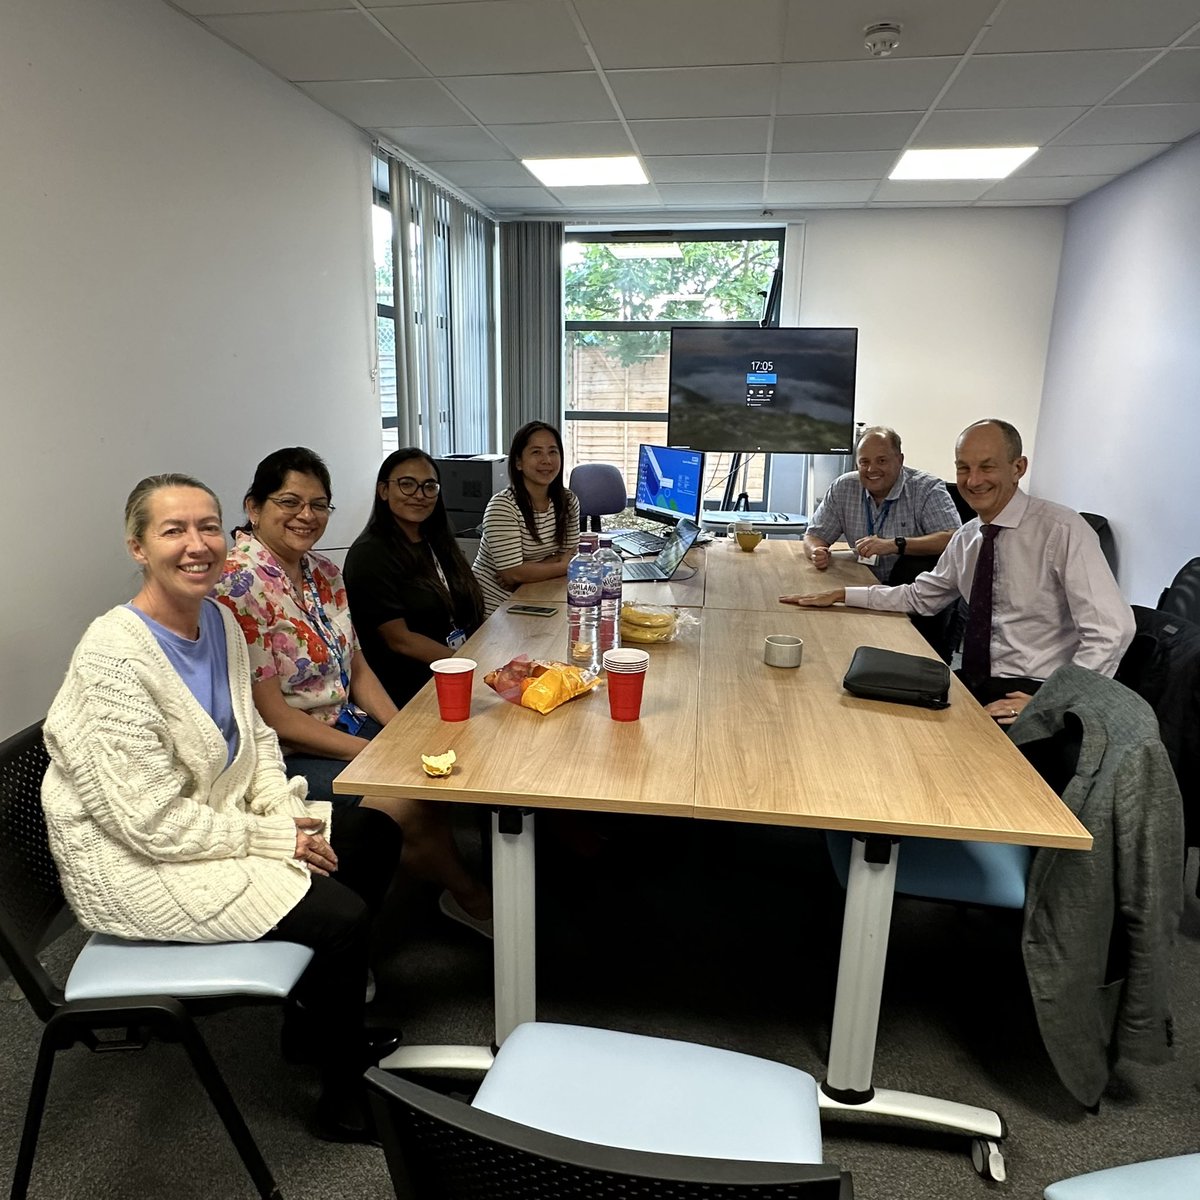 Visited by our ICS CMO and regional medical director @dulwichchris @CMOSWLondon chatting with our CC & CSW. senior leaders and front line professionals connecting and chatting primary care access & PCN neighborhood working @NHSEngland @NHSEnglandLDN @SWLNHS @rankine @NHSConfed